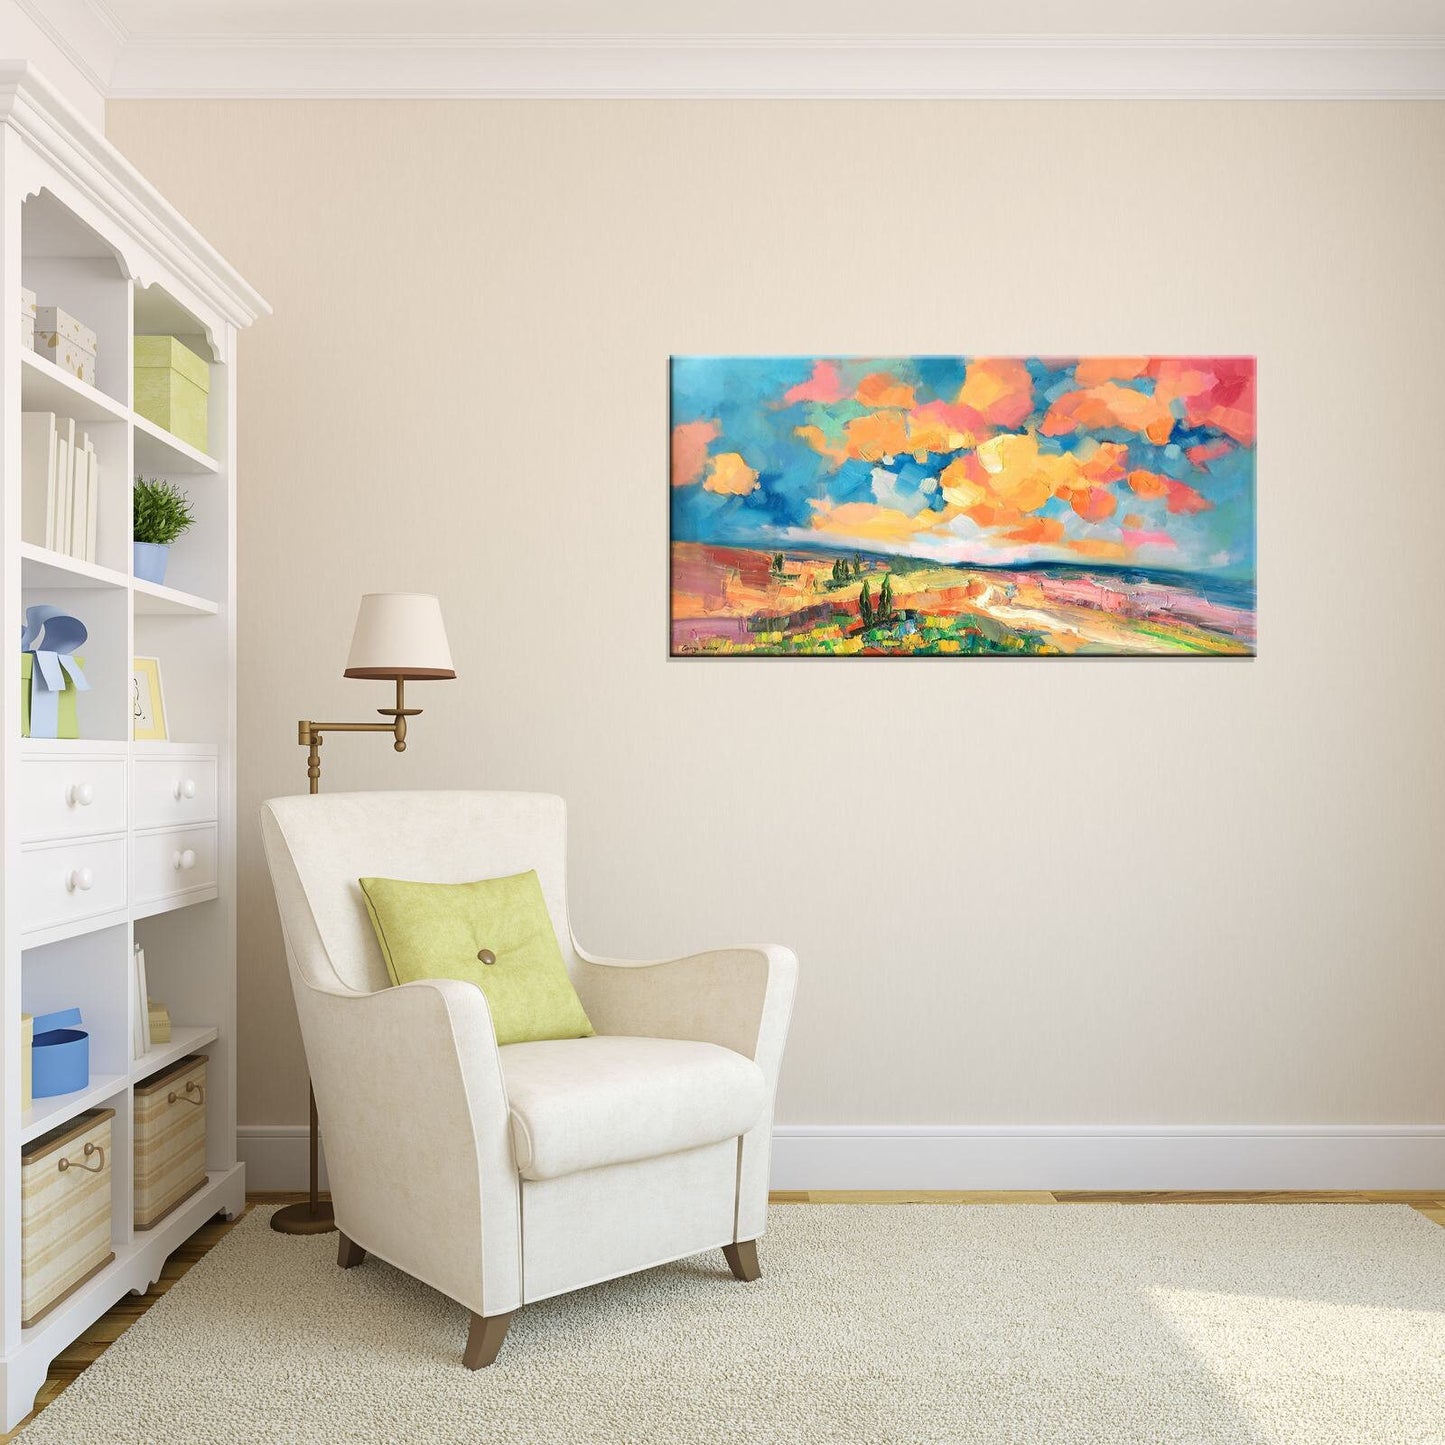 Landscape Painting, Abstract Landscape, Oil Painting Original, Palette Knife Art, Oil Painting Abstract, Living Room Wall Decoration